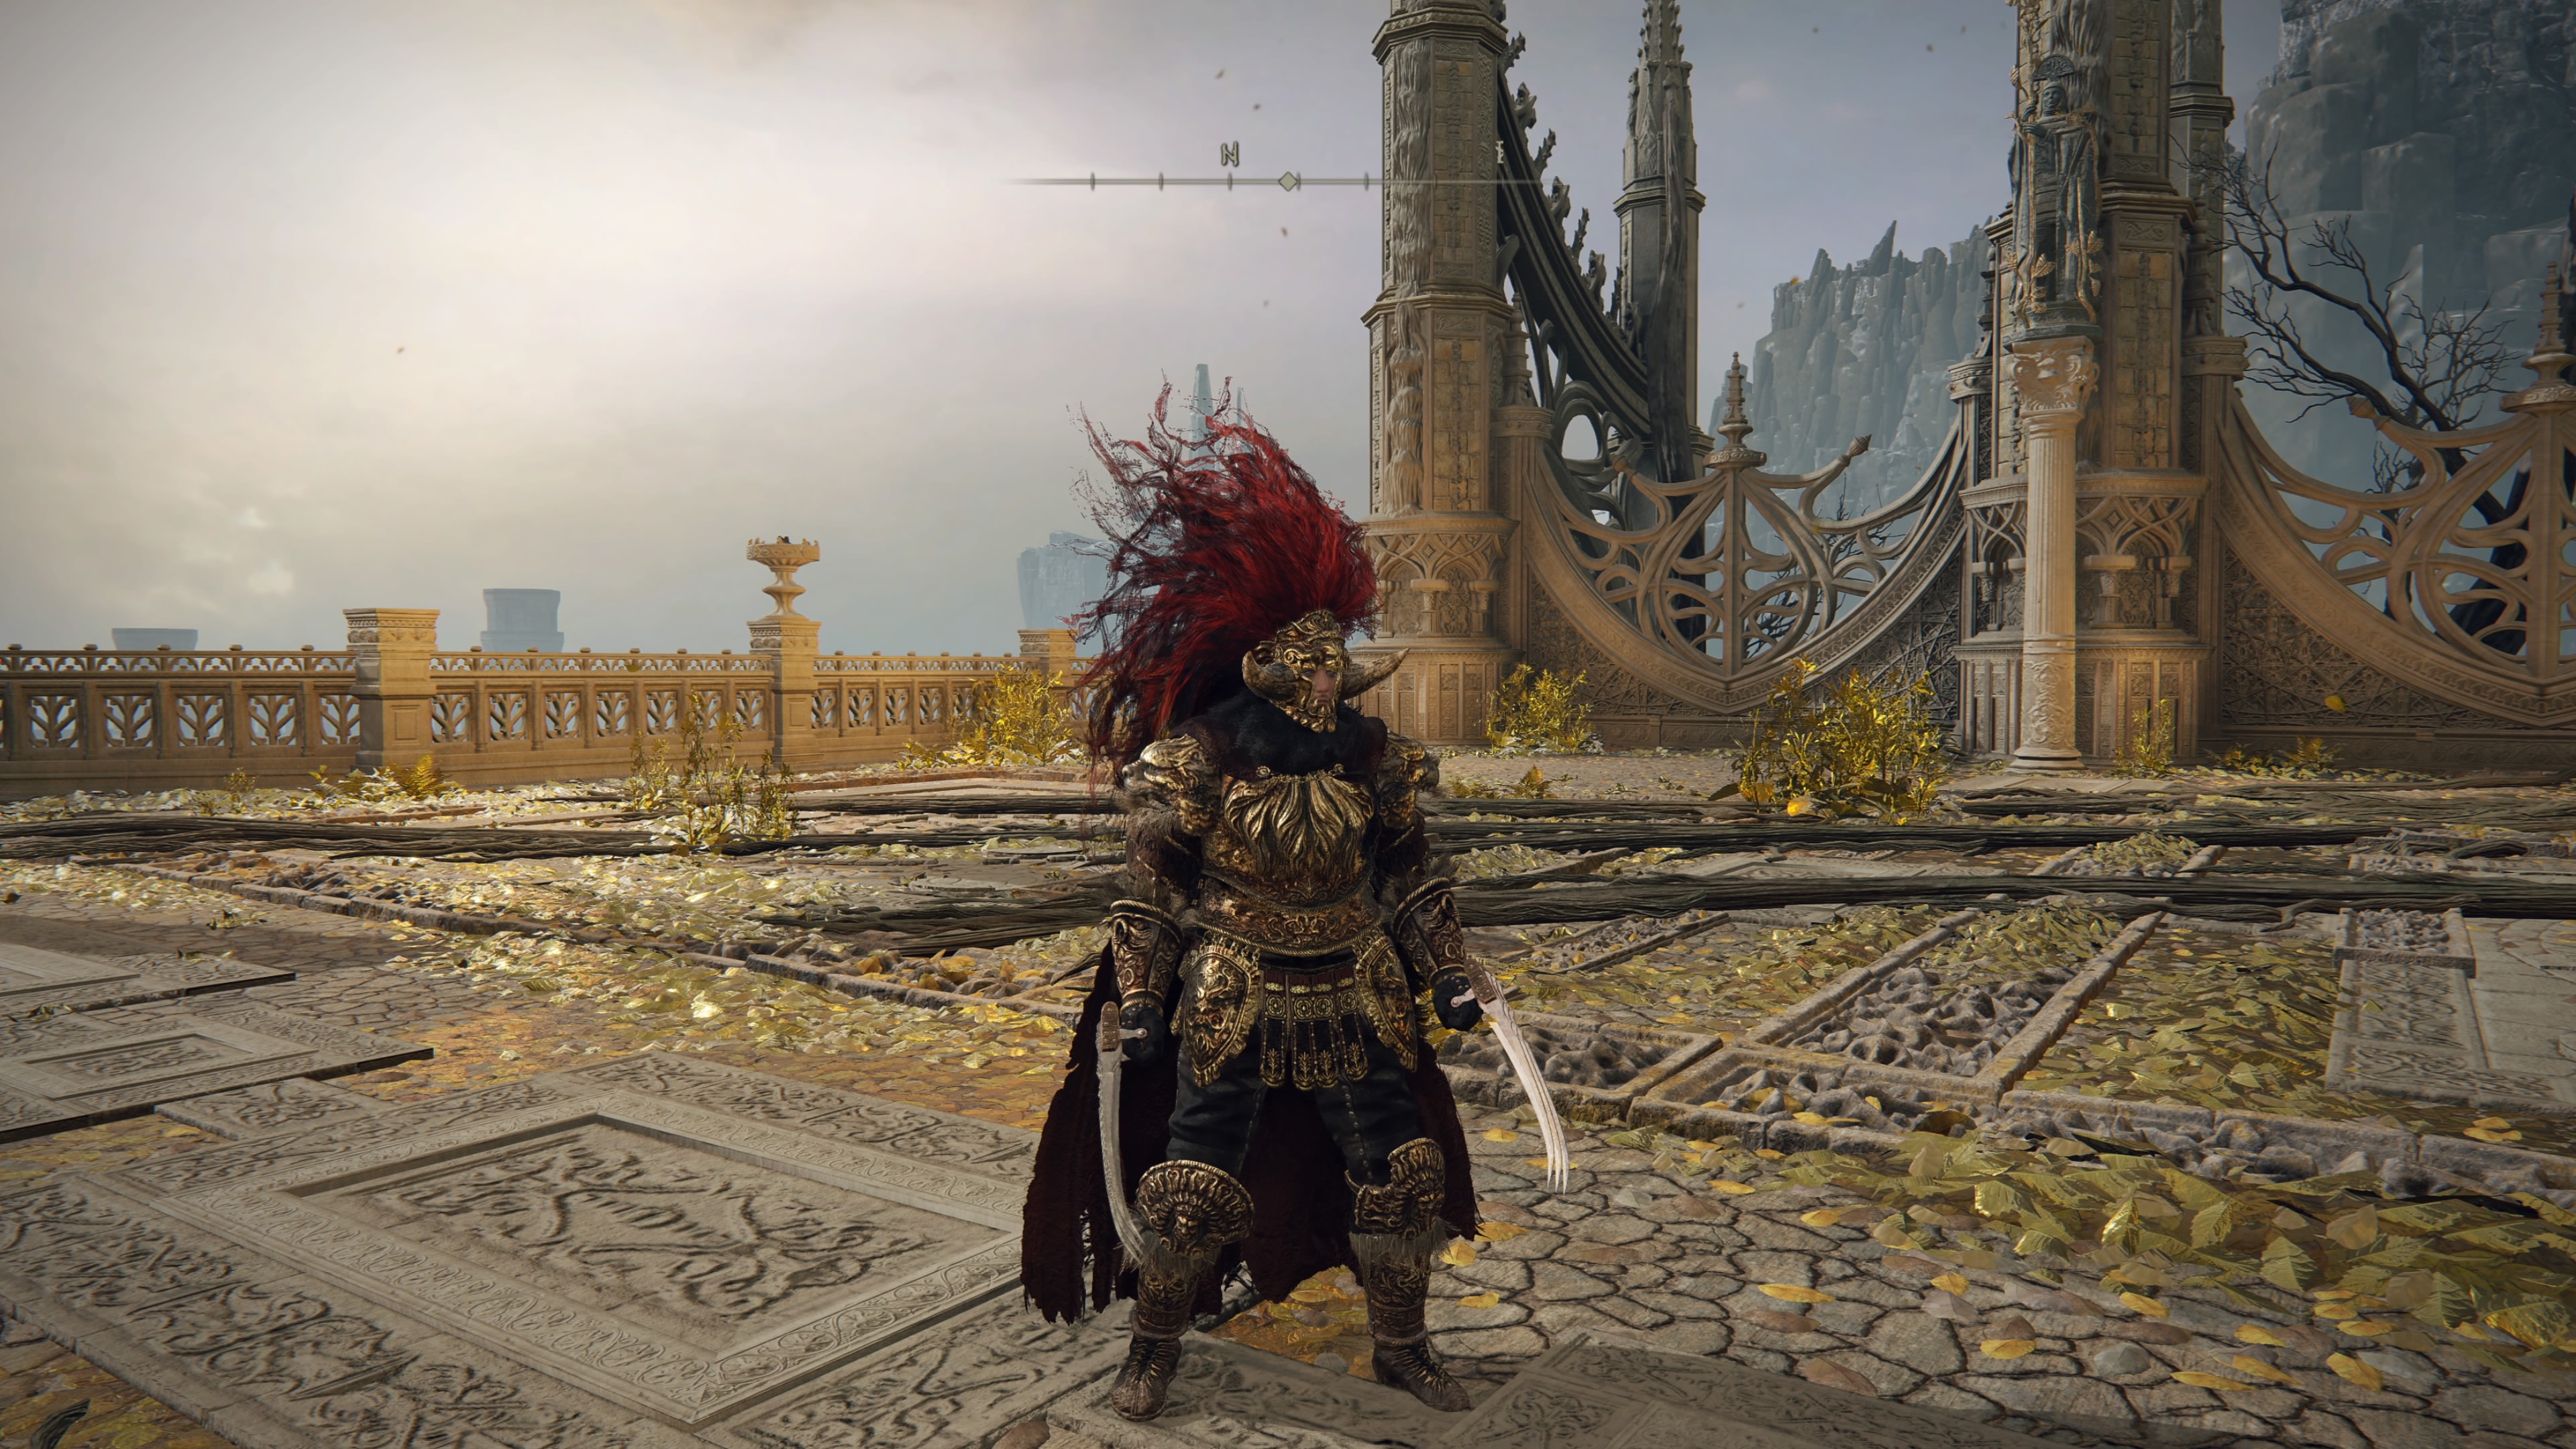 The location of the Elden Ring armor is great